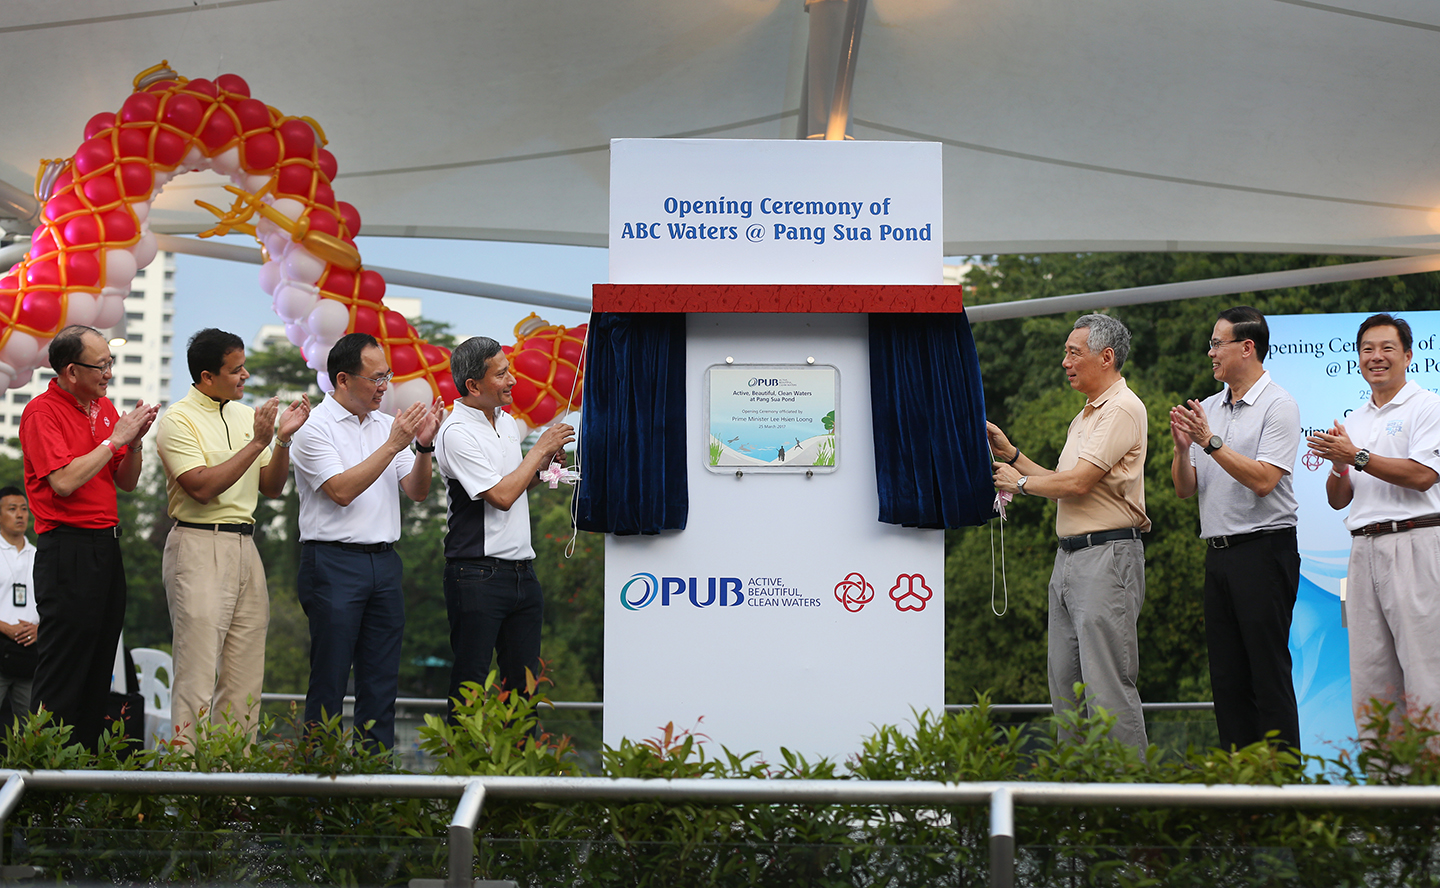 Opening of ABC Waters at Pang Sua Pond on 25 Mar 2017 (MCI Photo by Terence Tan)